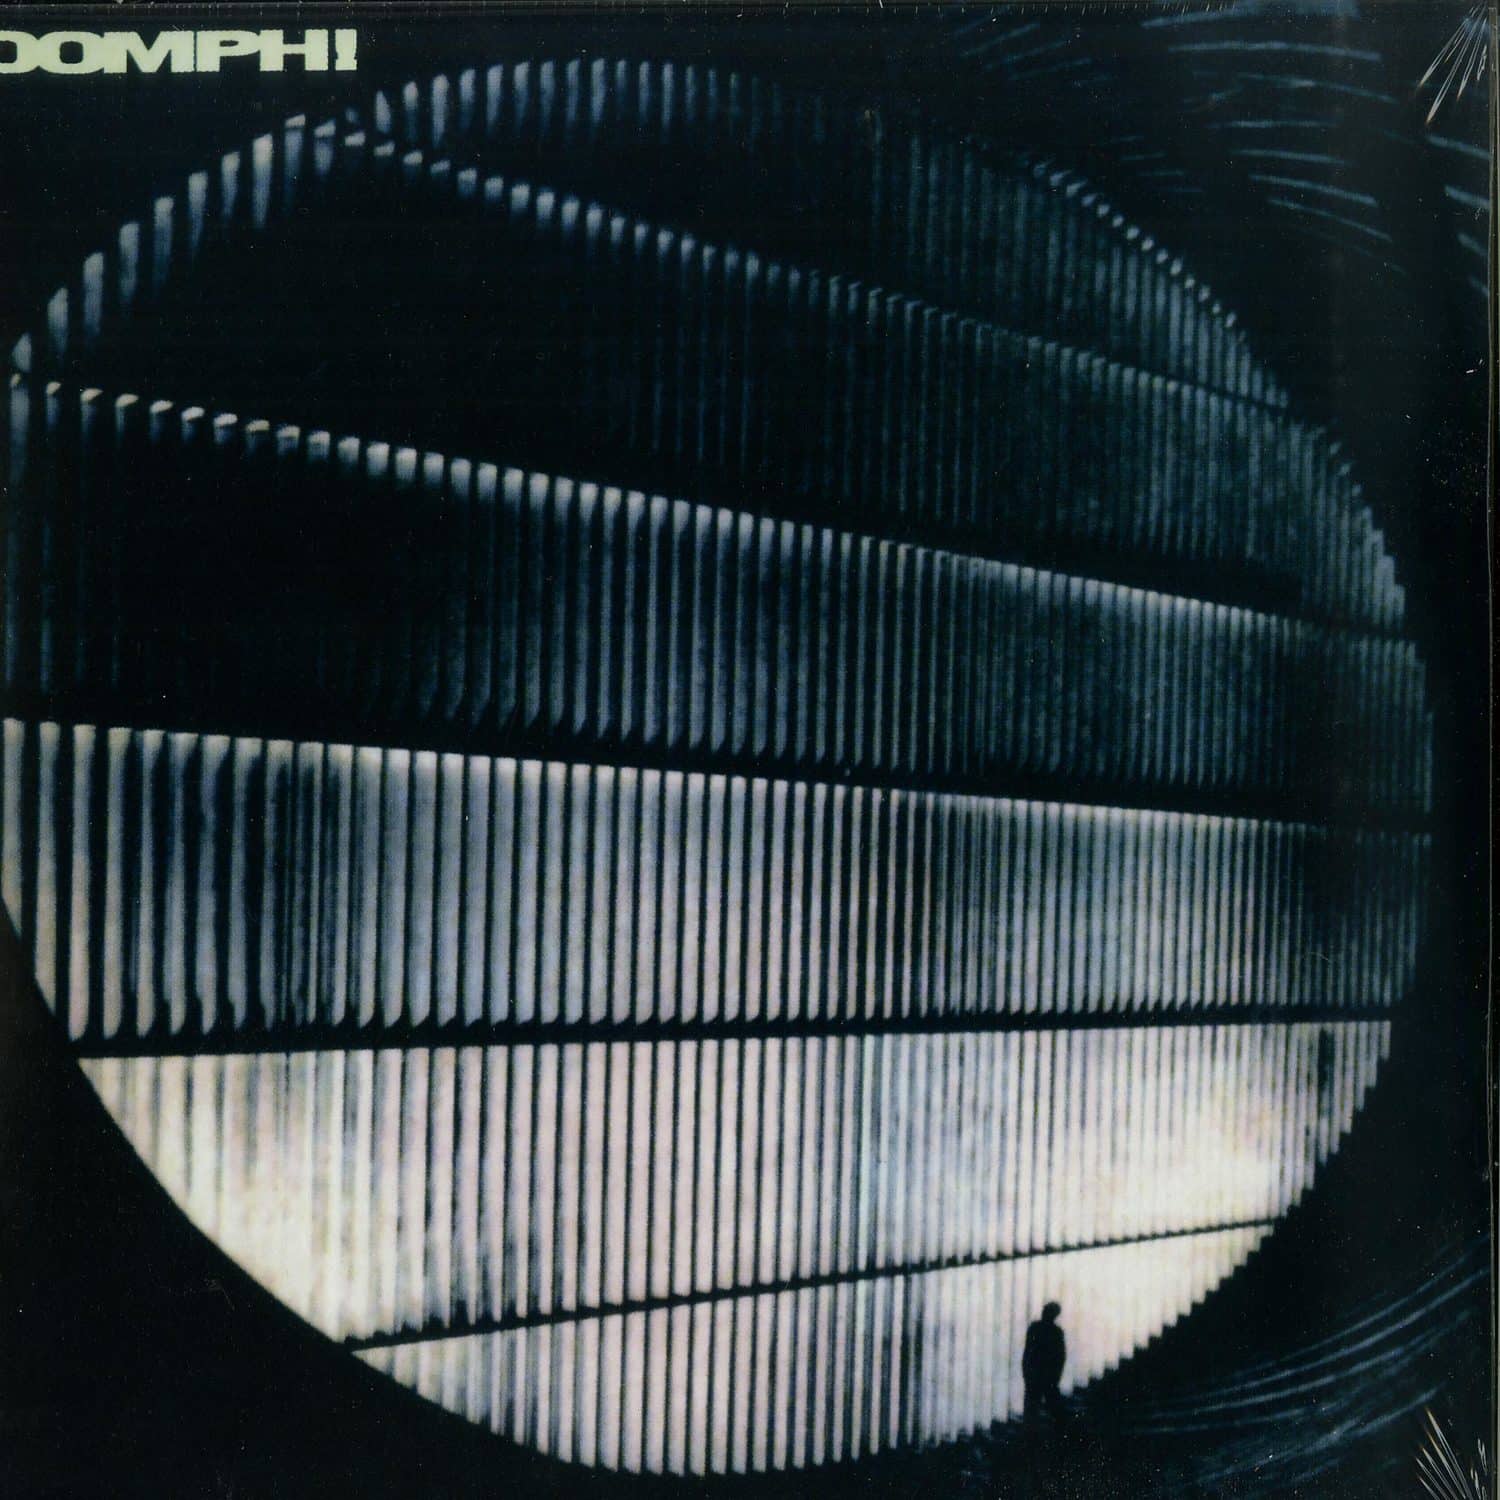 Oomph! - OOMPH! 